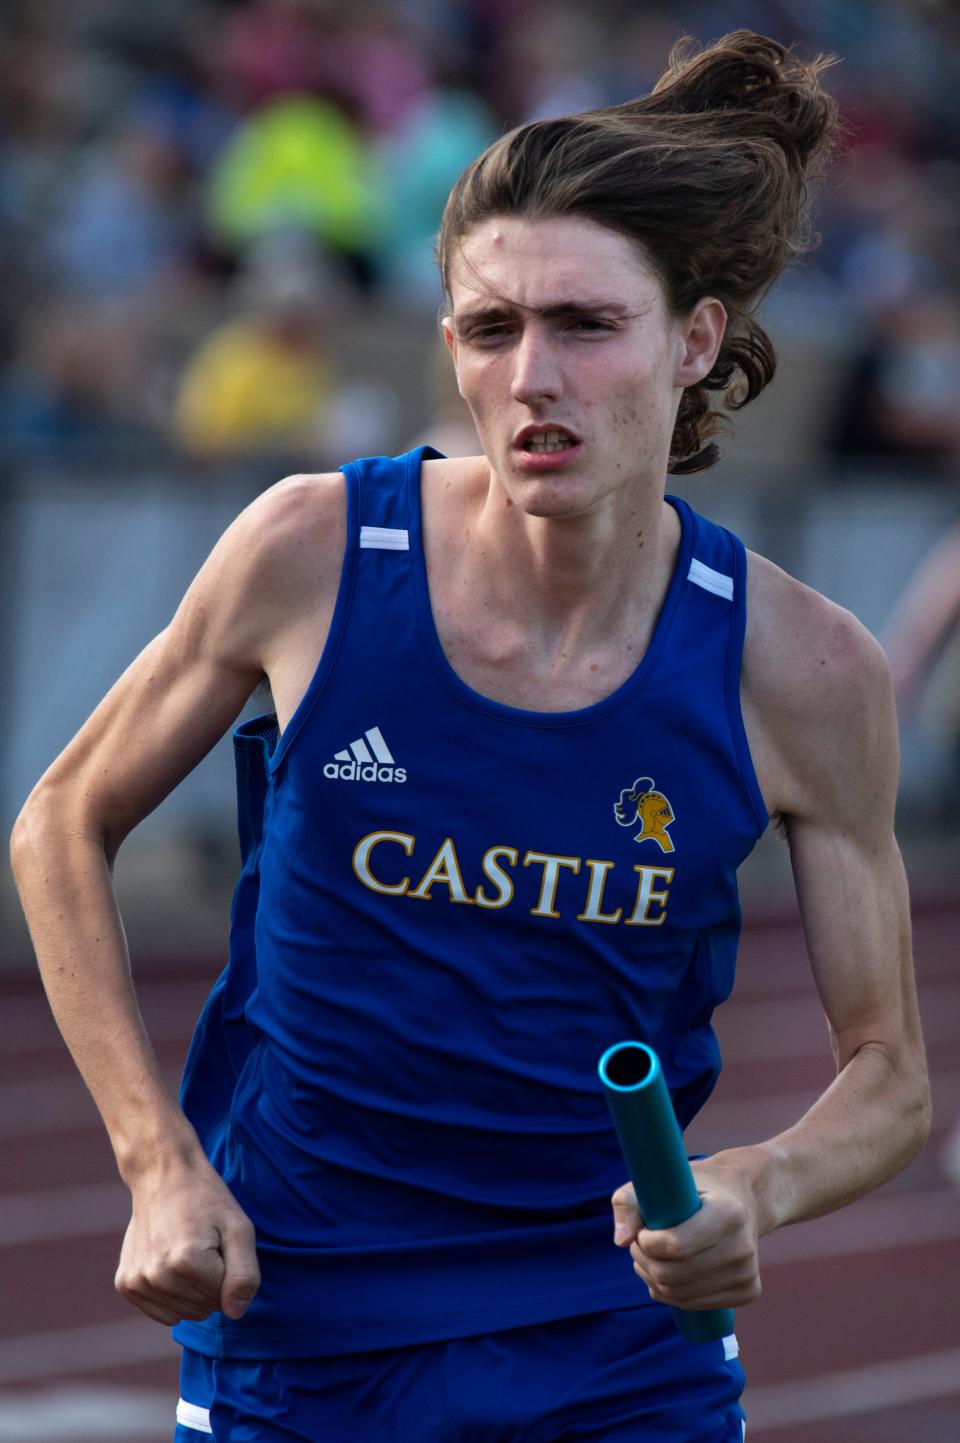 Castle's Andrew Mangum competes in the 4x800 Meter Relay during the Evansville Central IHSAA Boys Regional Track & Field Meet at Central Stadium Thursday evening, May 26, 2022.